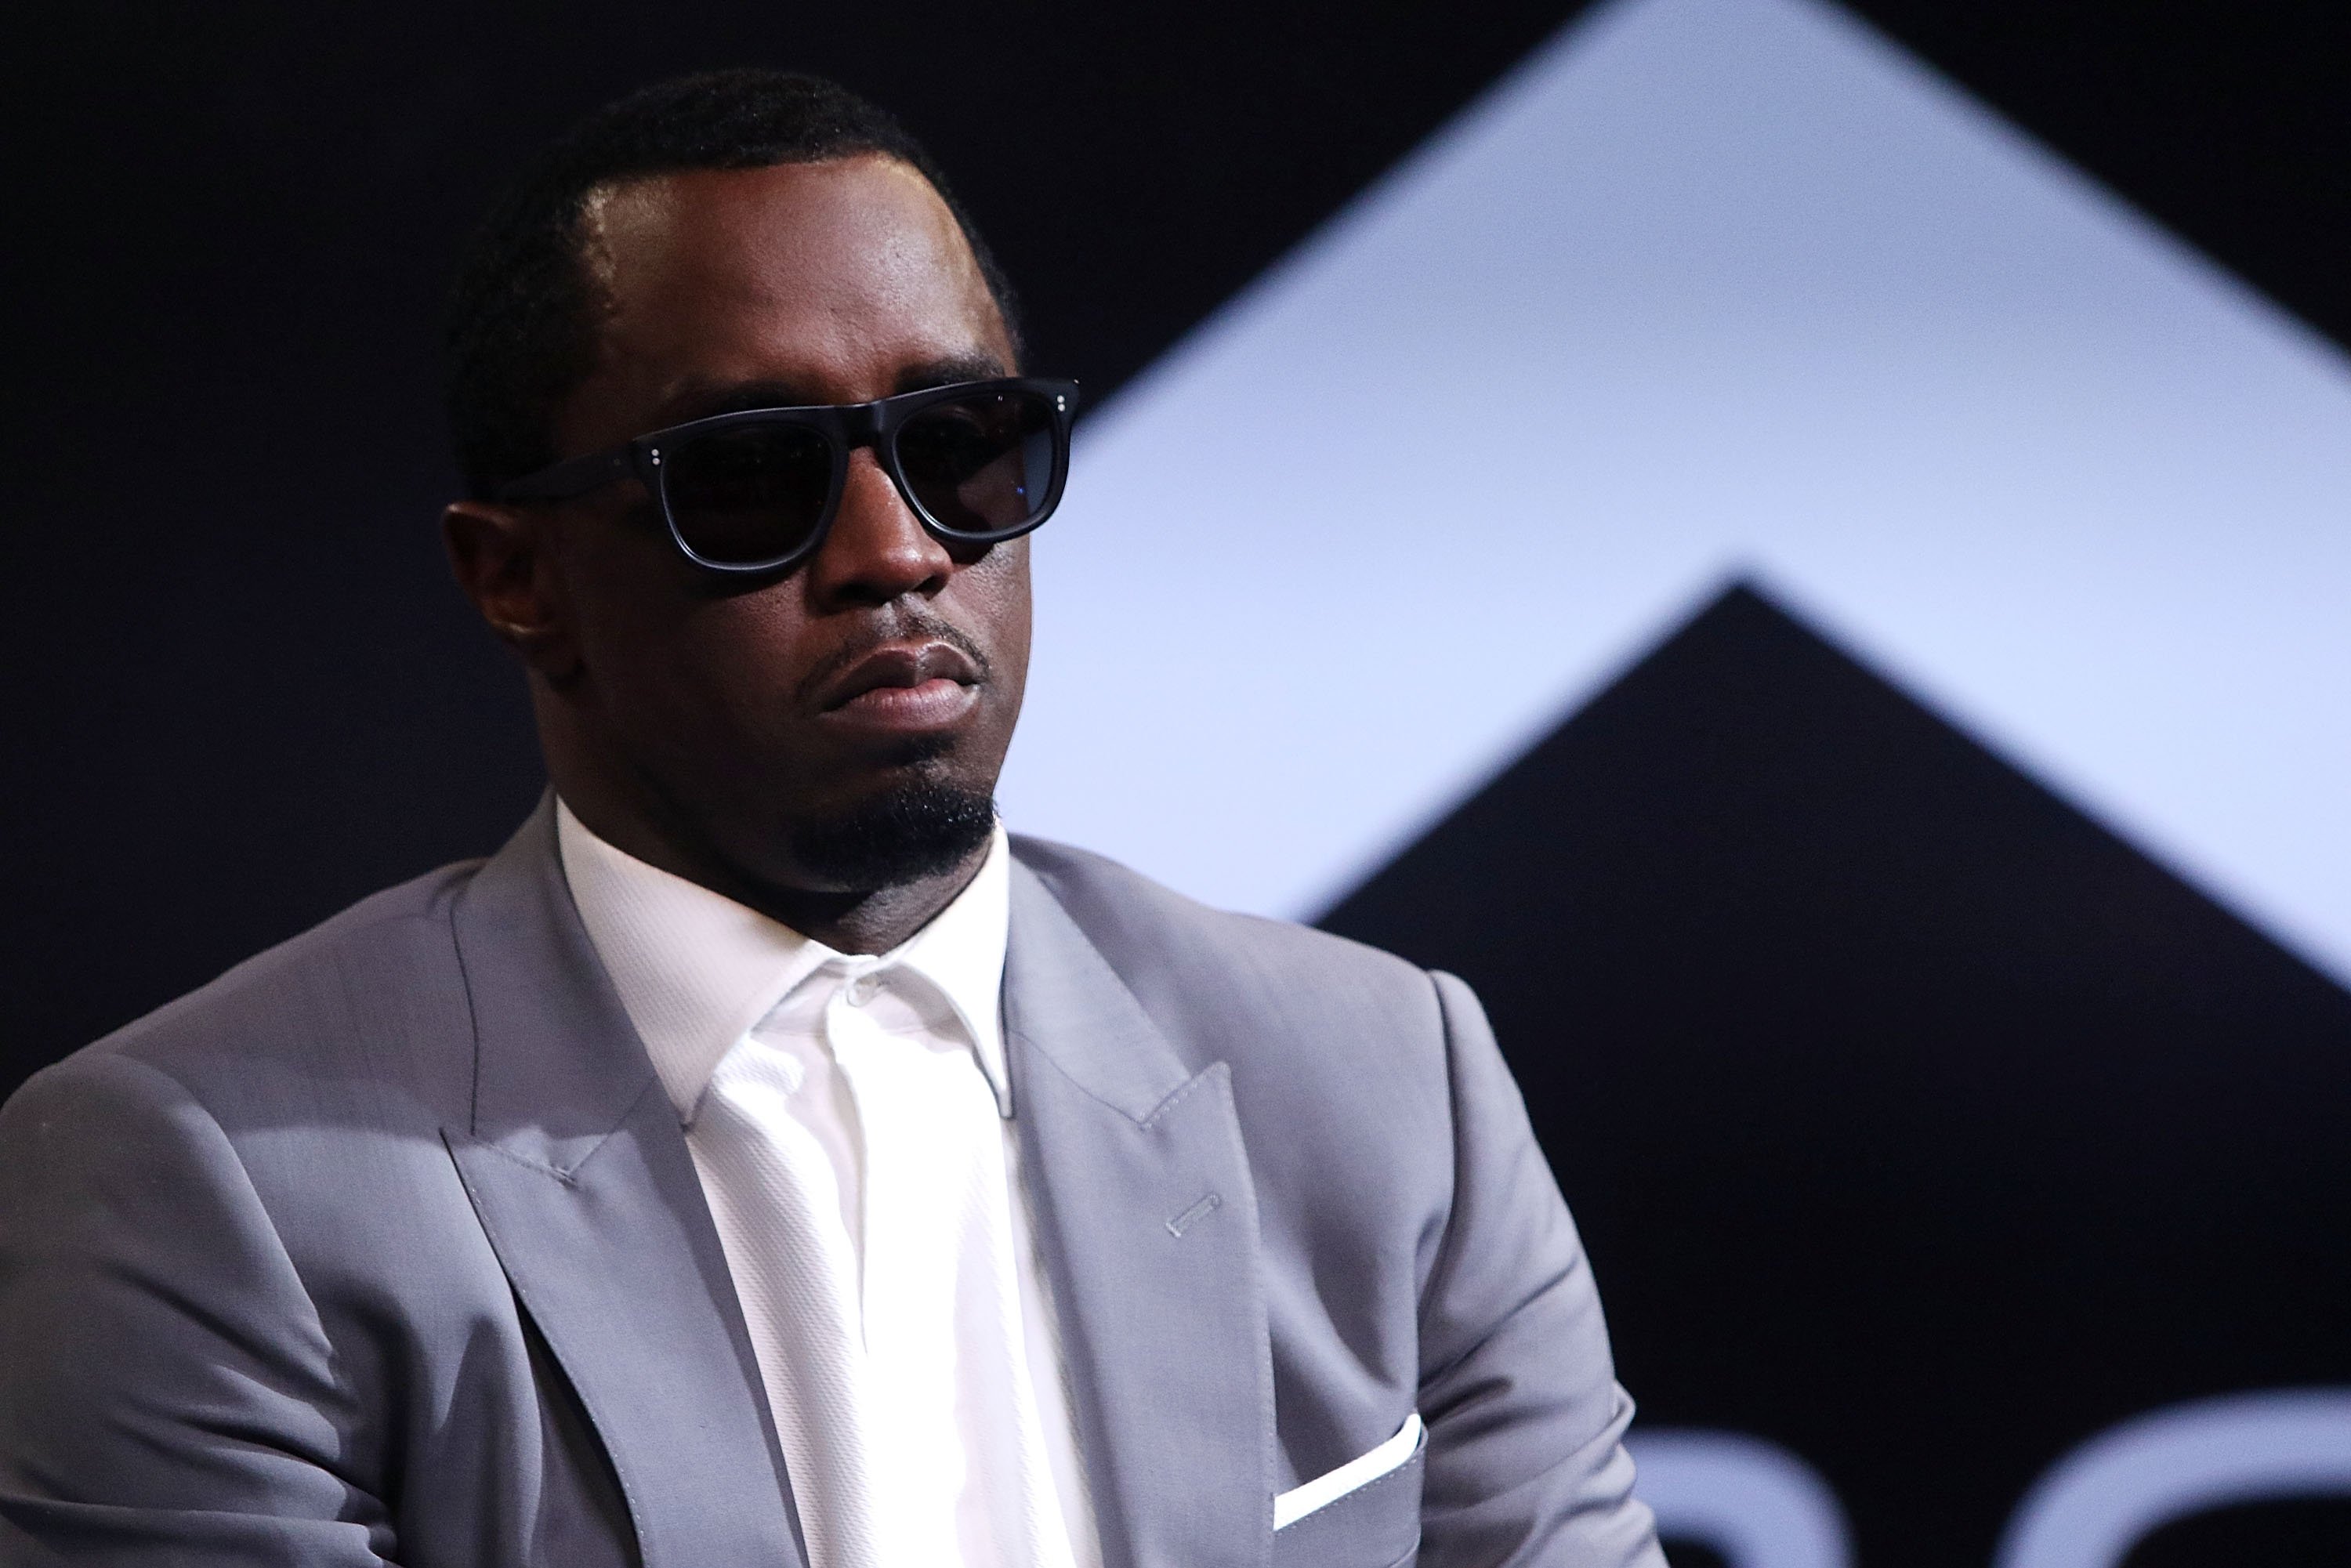 Sean John Combs aka Diddy in 2016. | Photo: Getty Images